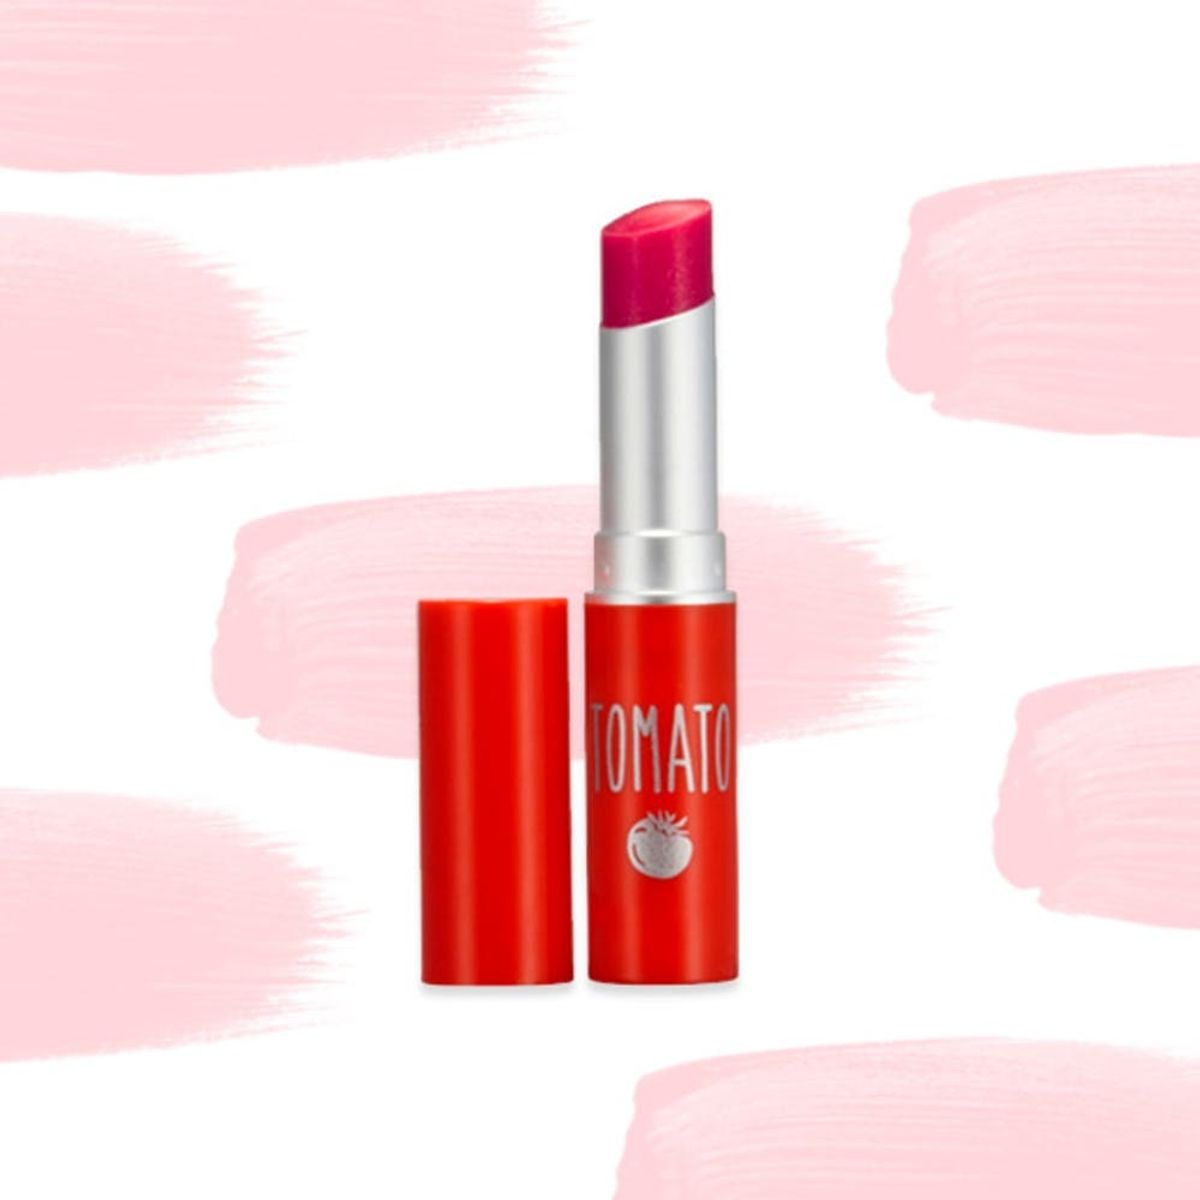 This Tinted Lip Balm Is Made from Tomatoes